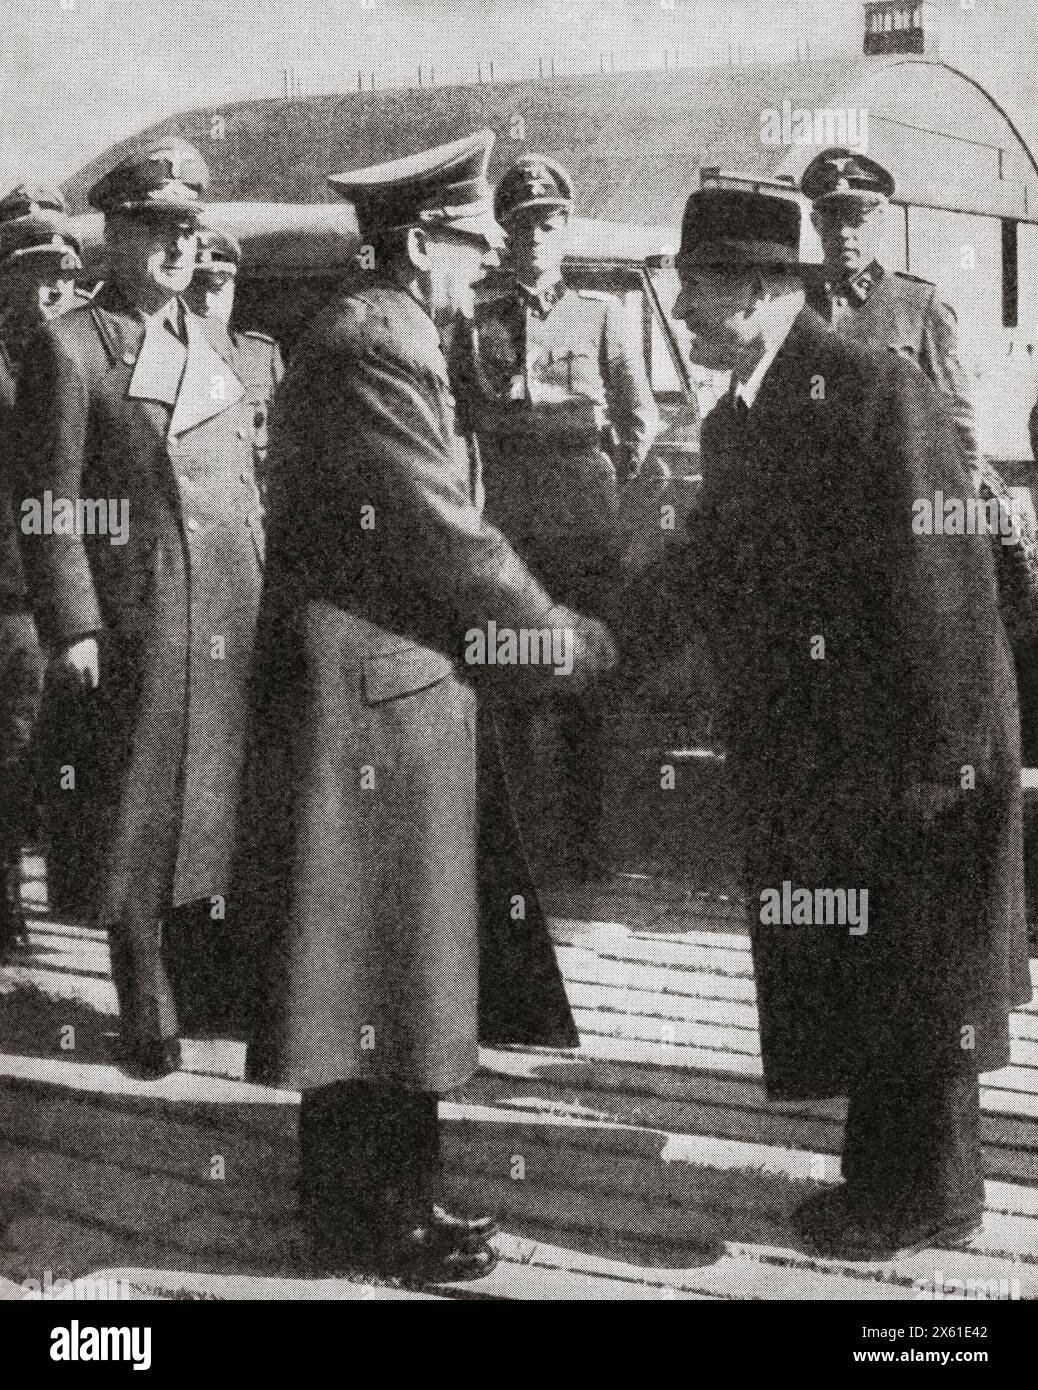 Mussolini saying goodbye to Hitler before returning to Italy after being freed from prison by Nazi paratroops in September, 1943.  Adolf Hitler, 1889 – 1945. German politician, demagogue, Pan-German revolutionary, leader of the Nazi Party, Chancellor of Germany, and Führer of Nazi Germany from 1934 to 1945. Benito Amilcare Andrea Mussolini, 1883 – 1945. Italian dictator, journalist, founder and leader of the National Fascist Party (PNF), and Prime Minister of Italy. From The War in Pictures, Fifth Year. Stock Photo